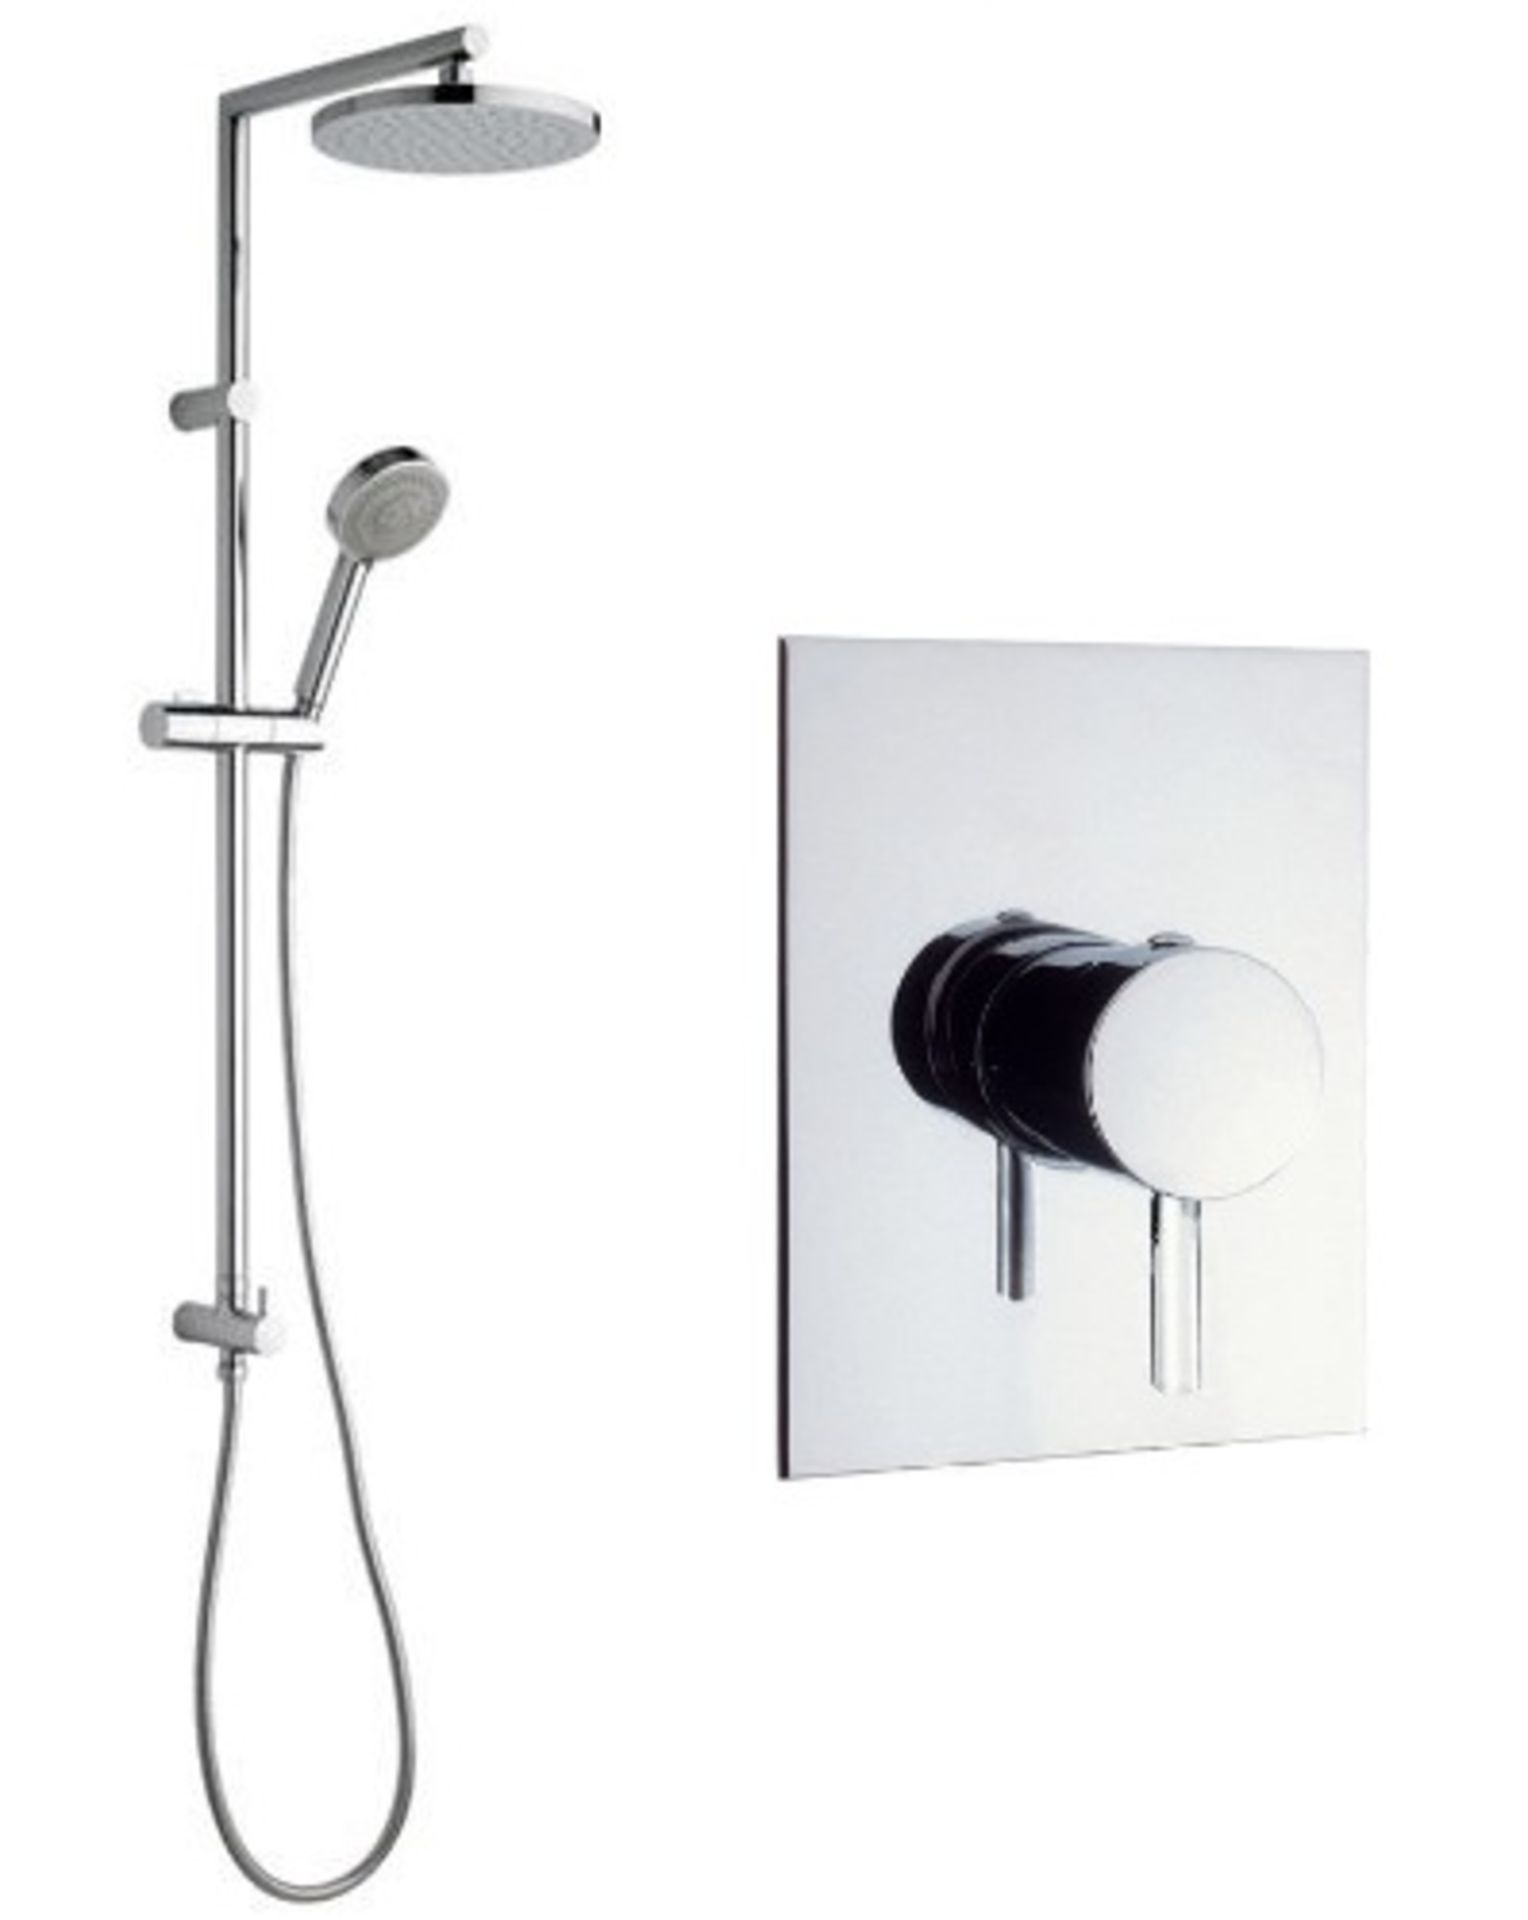 Nikels Fresh 200 shower system with 8 in